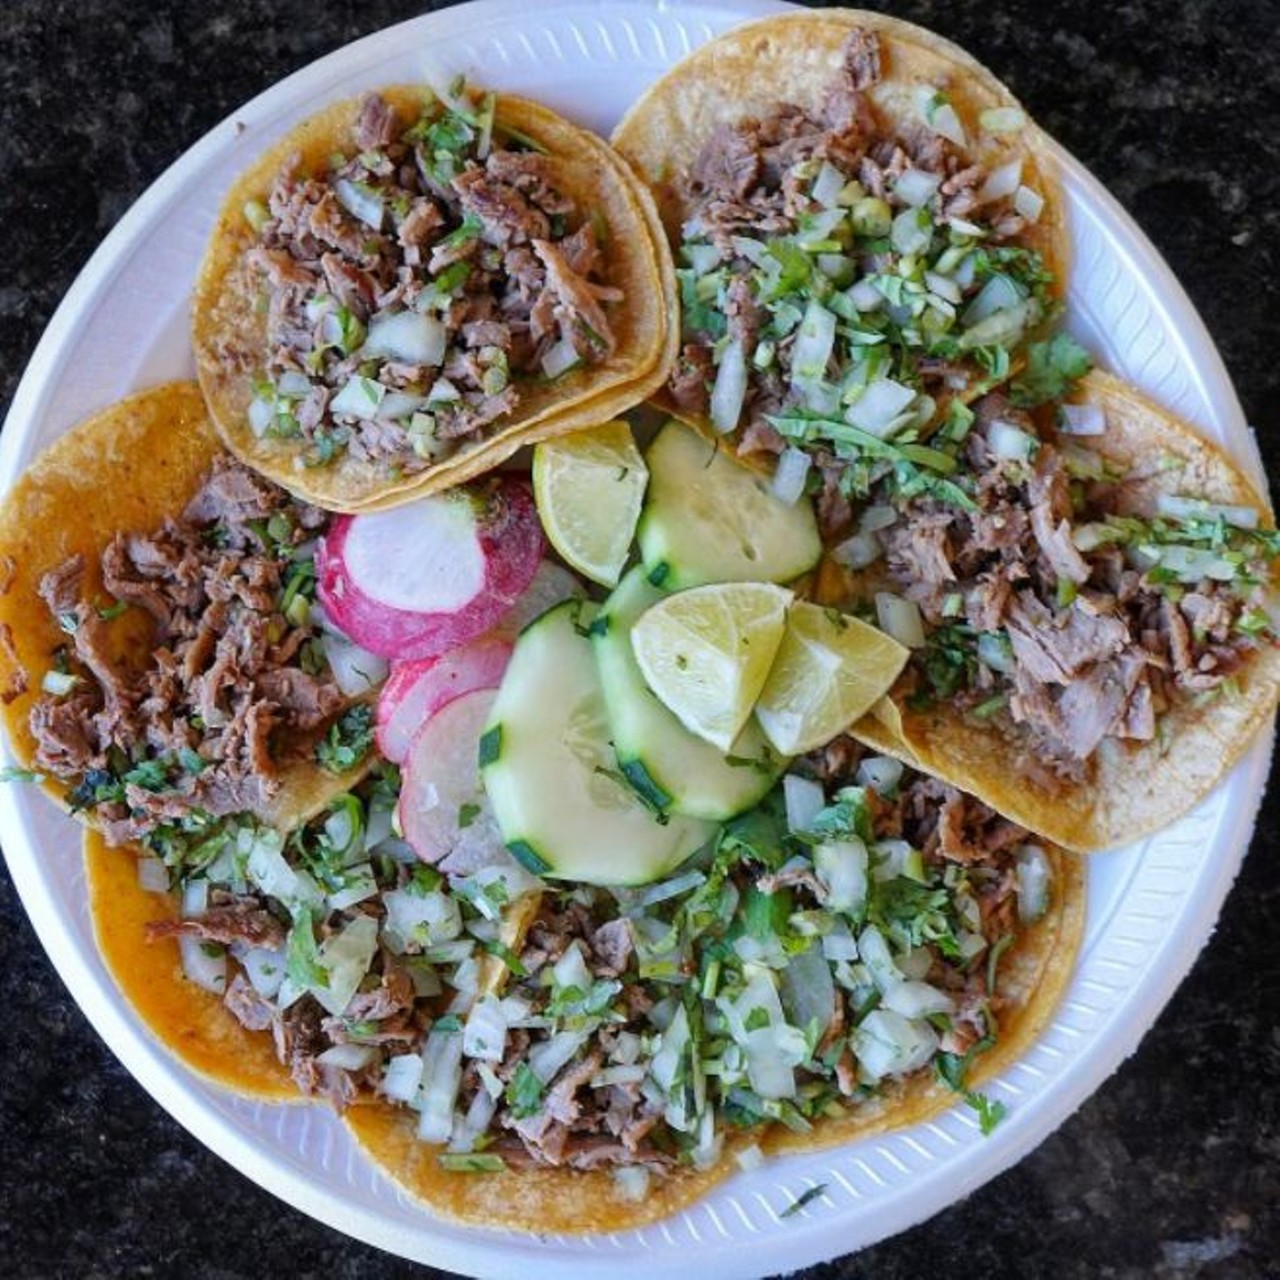 Tacos from  Taquitos West Ave.
2818 West Ave., (210) 525-9888
Both locations have their own je ne sais quoi, but you can&#146;t go wrong with a taquitos feast. Don&#146;t mis the quesadillas at the new location off Nacogdoches. 
Photo via Instagram, safood.e